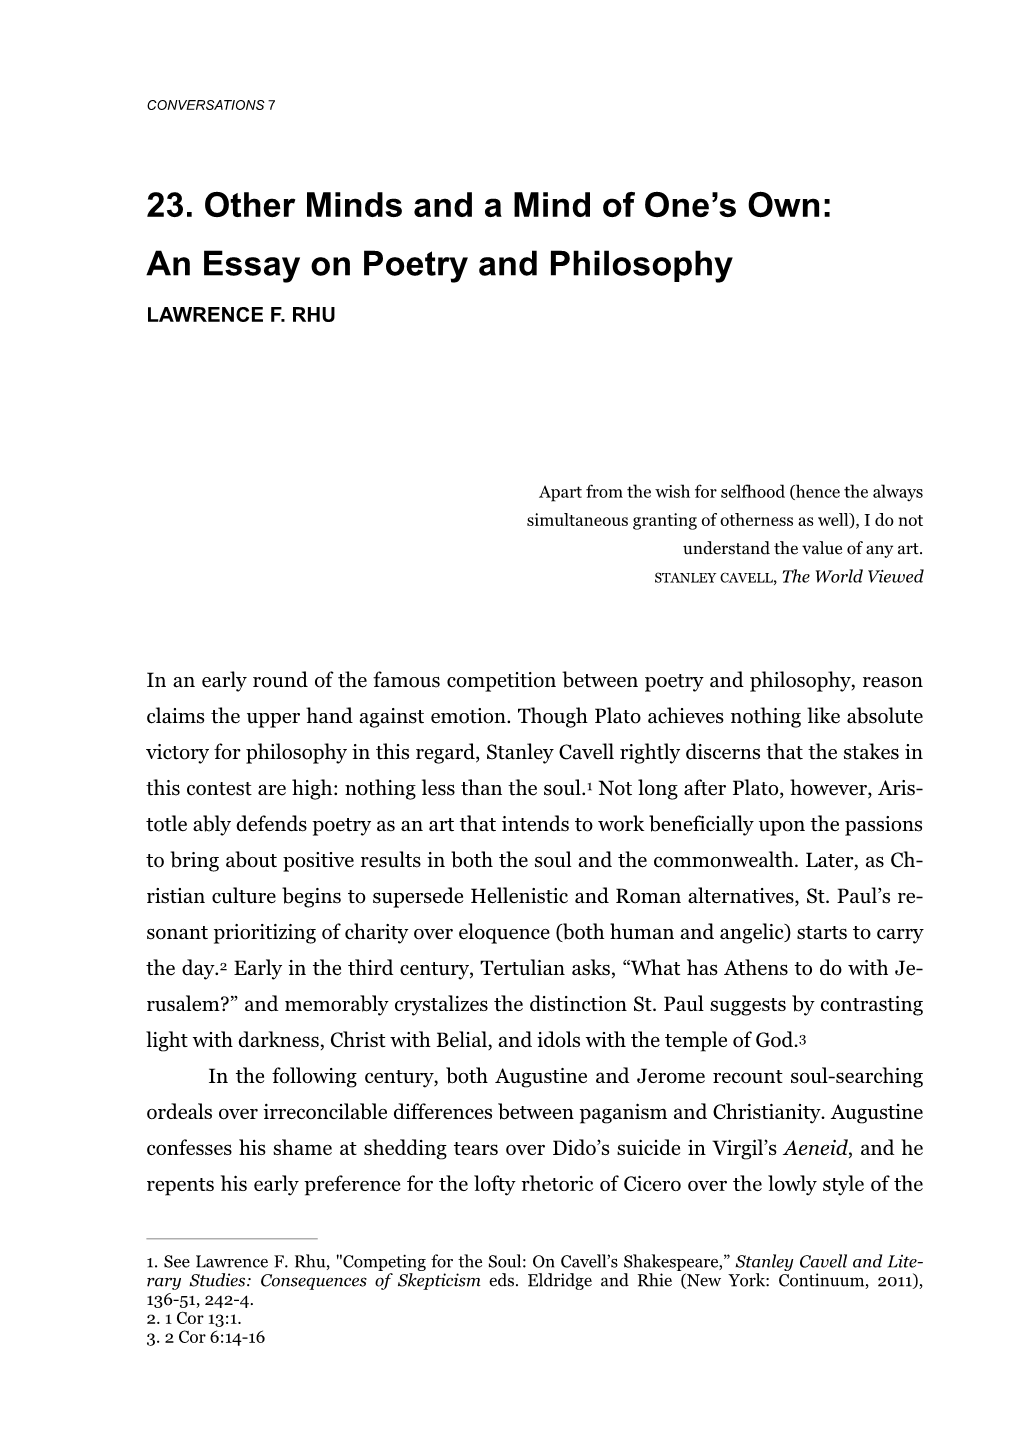 An Essay on Poetry and Philosophy